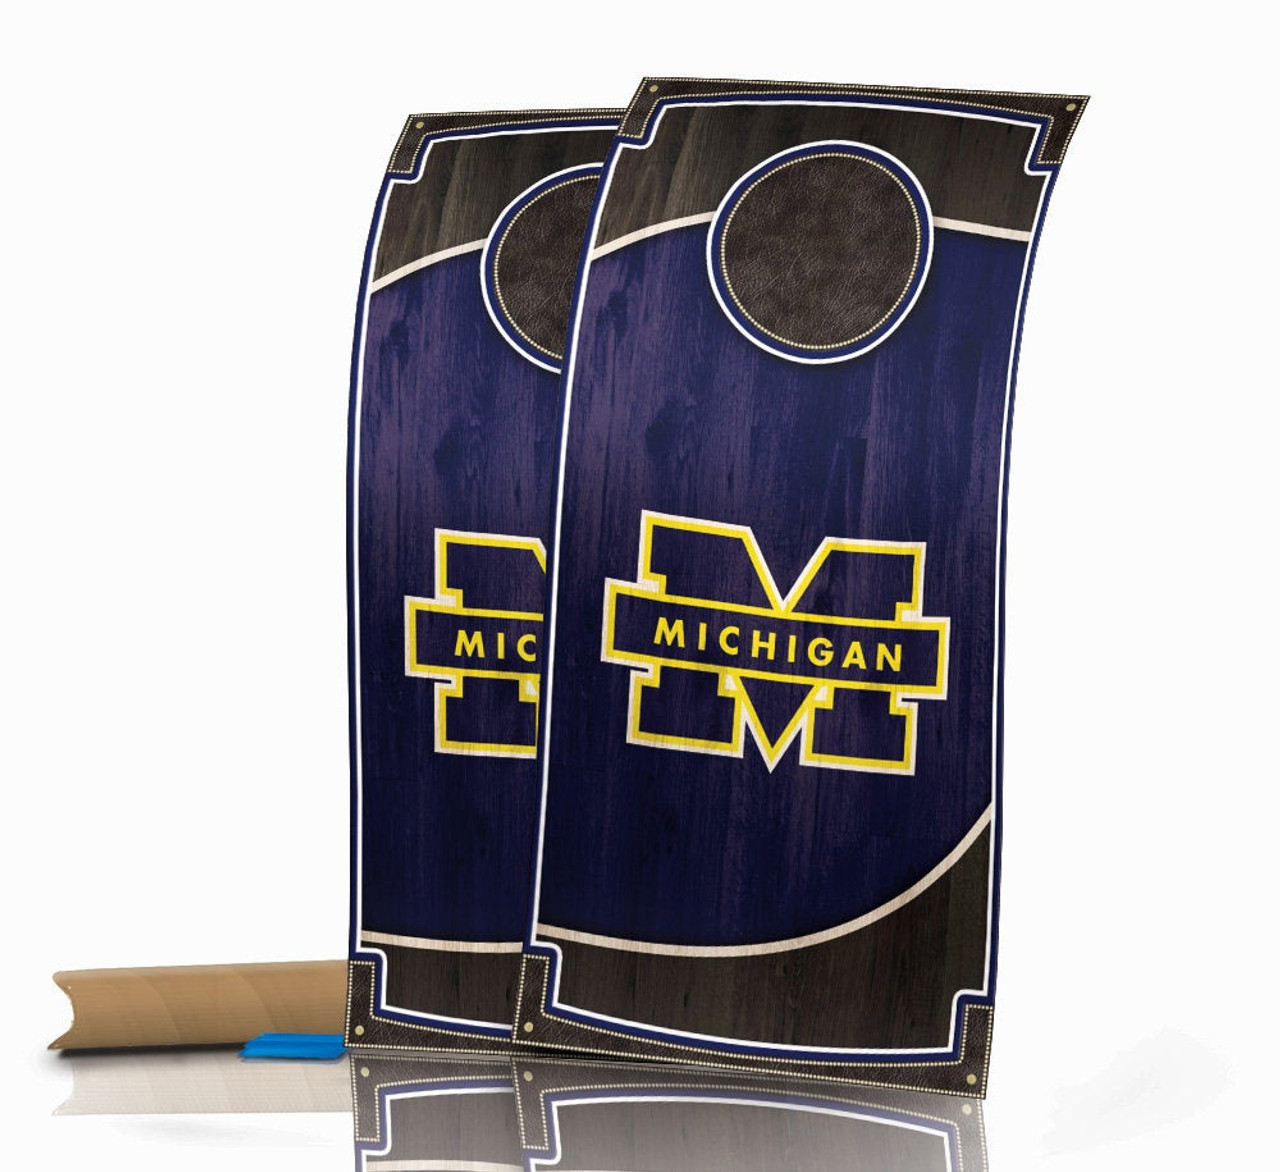 USA Michigan wolverines Cornhole Set of Decals Multiple colors Free Shipping 